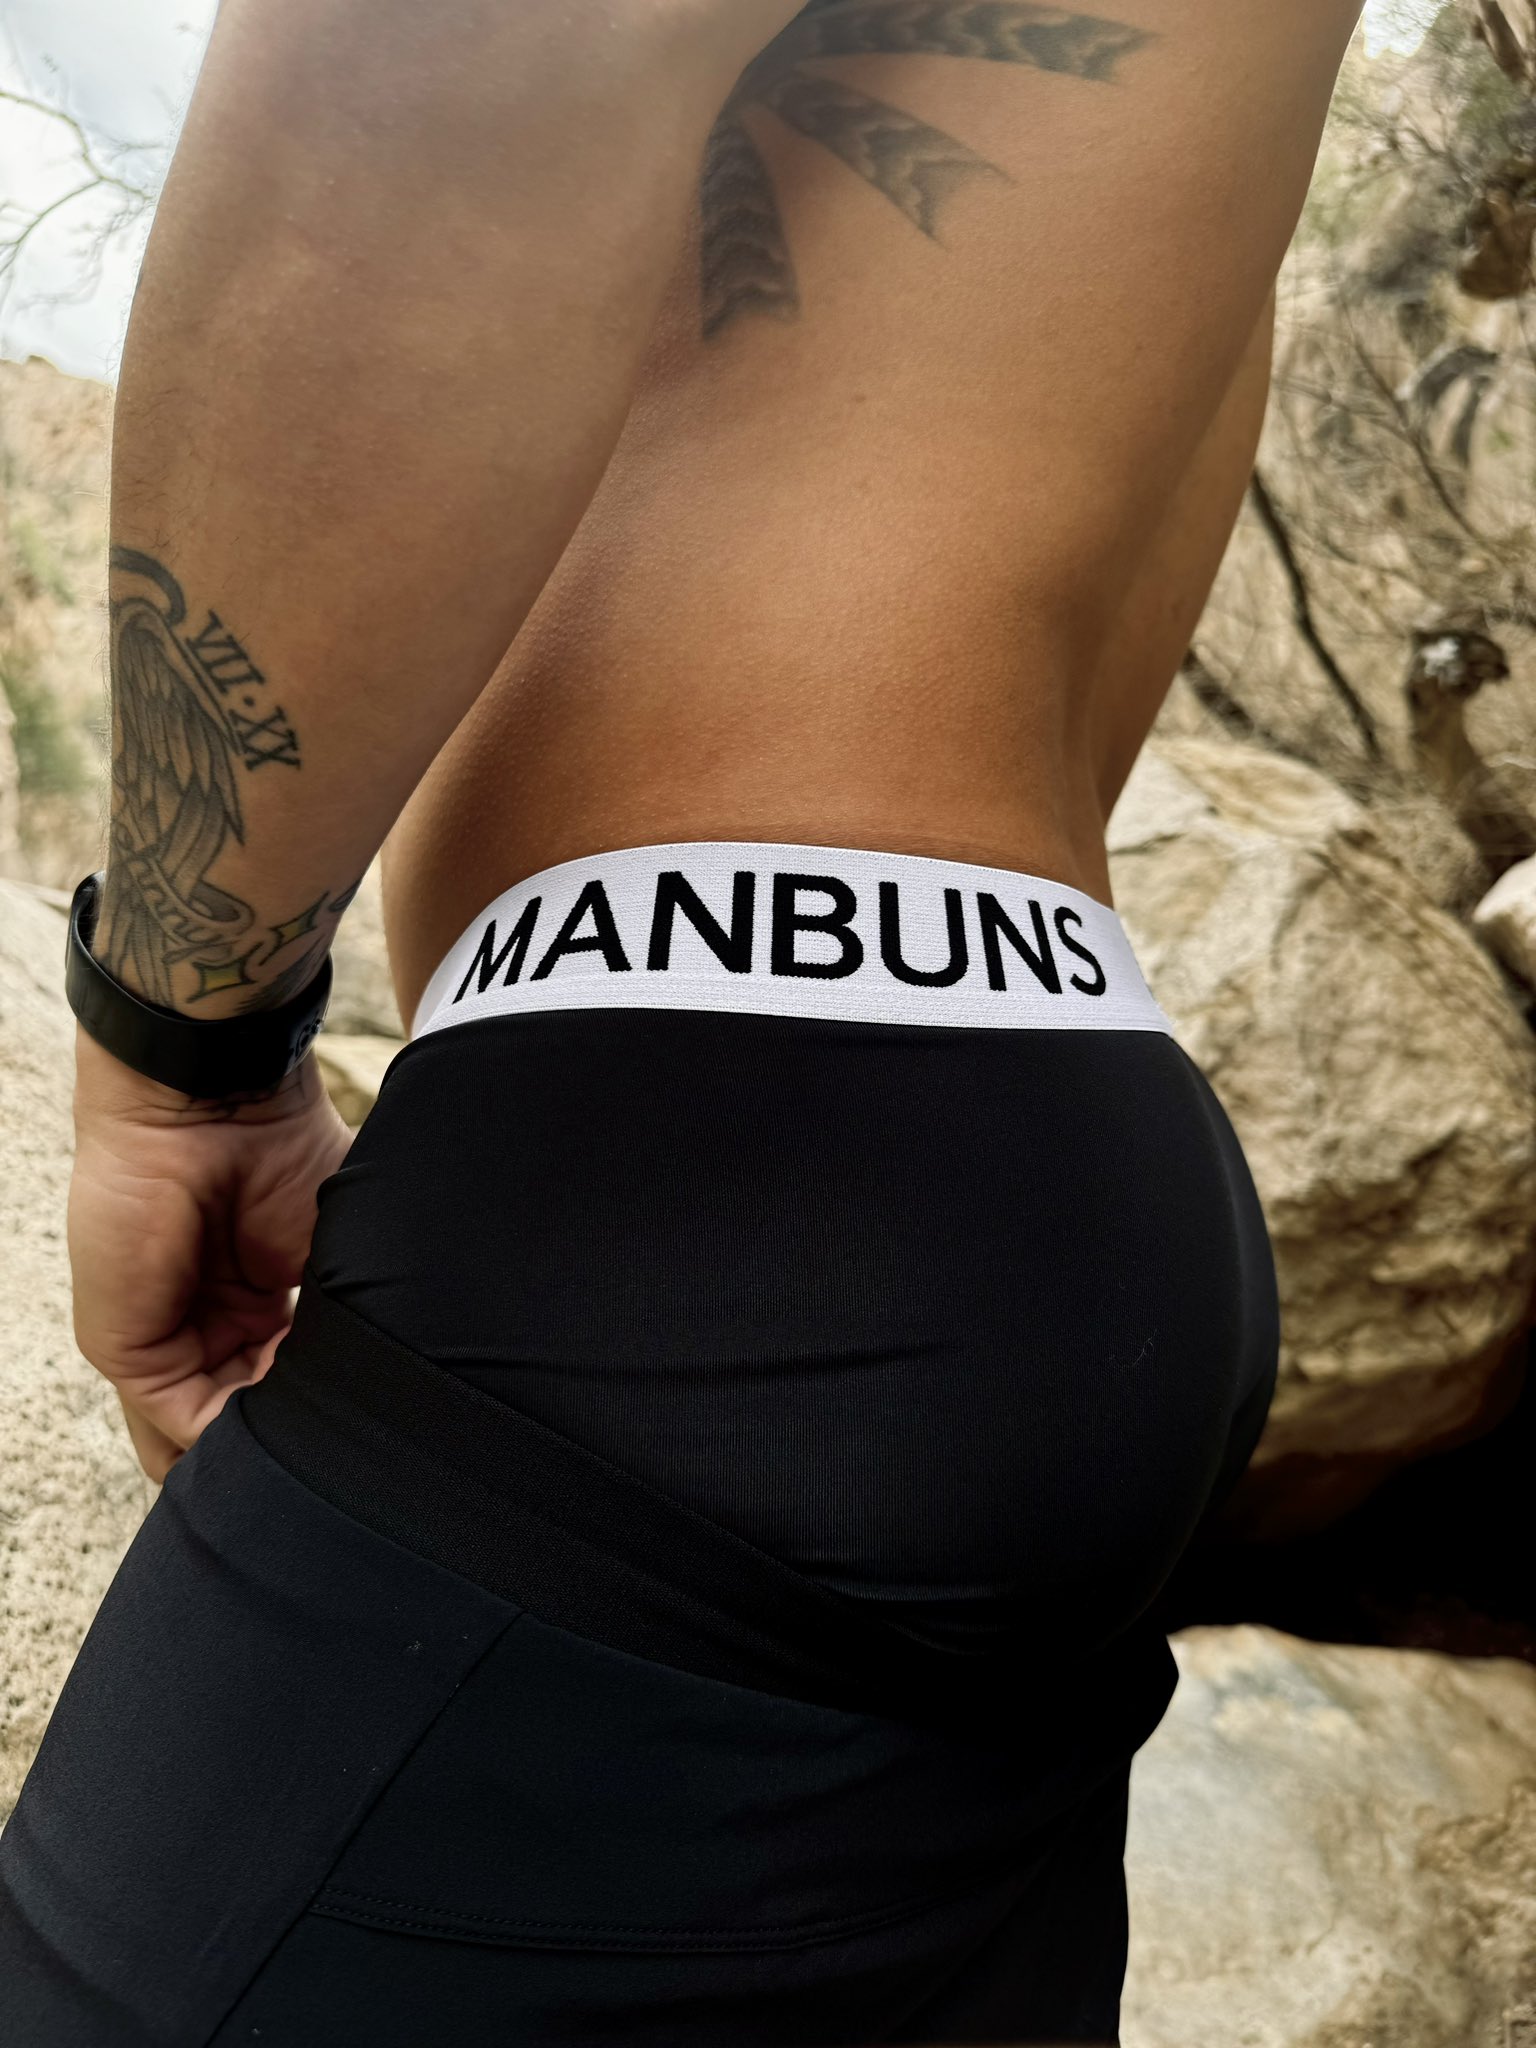 The Best Men's Exercise Underwear For Working Out – MANBUNS